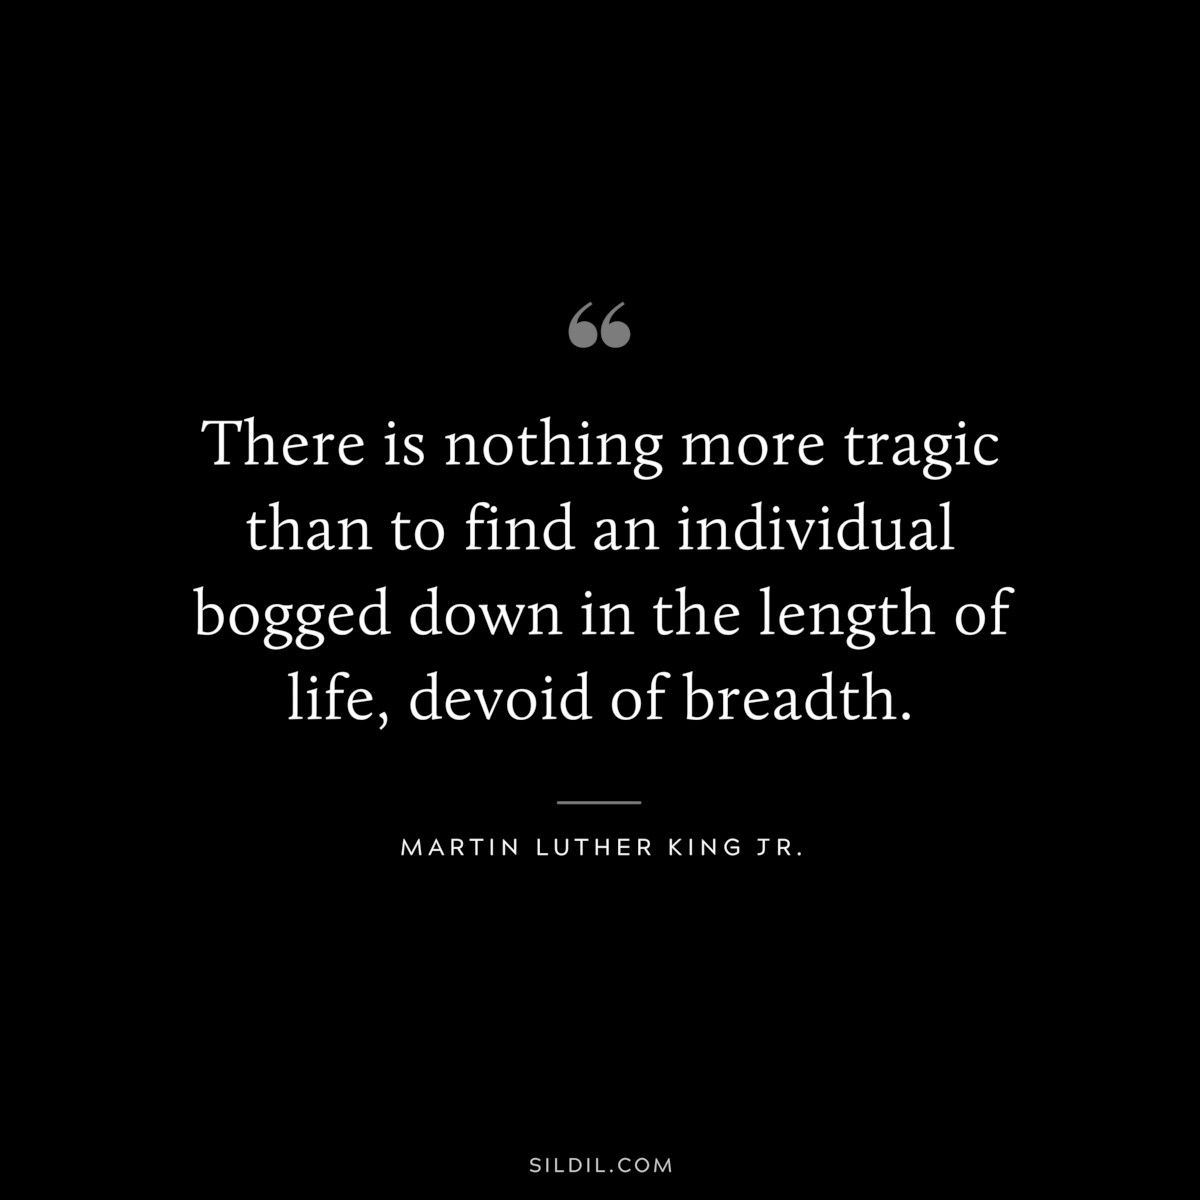 There is nothing more tragic than to find an individual bogged down in the length of life, devoid of breadth. ― Martin Luther King Jr.